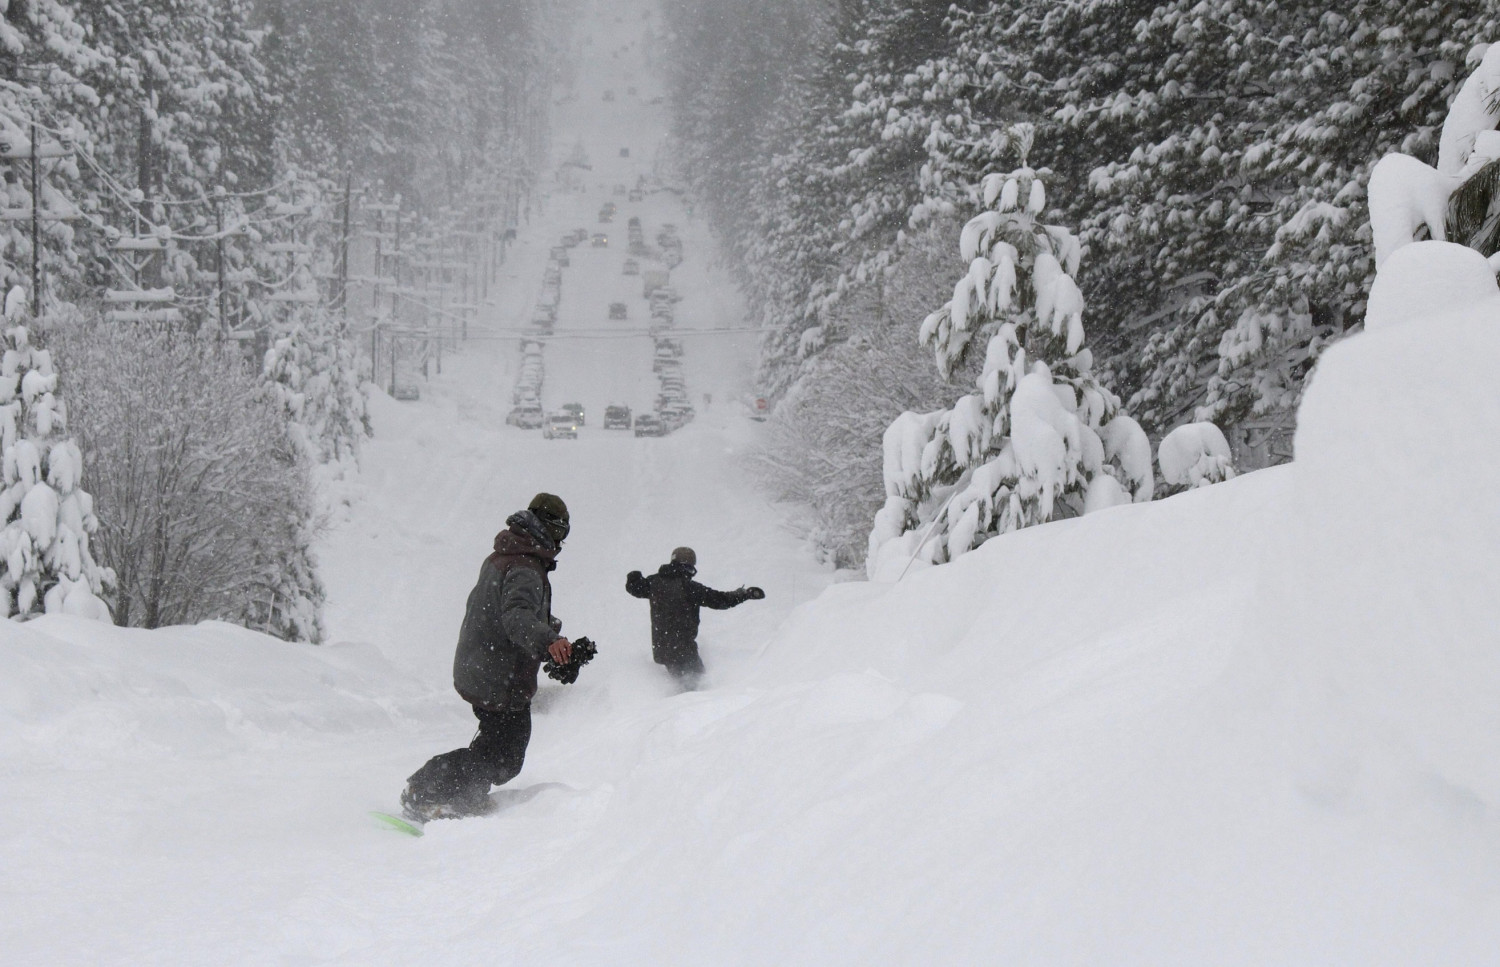 Snow Too Thick to Plow Keeps Skiers From California Resorts